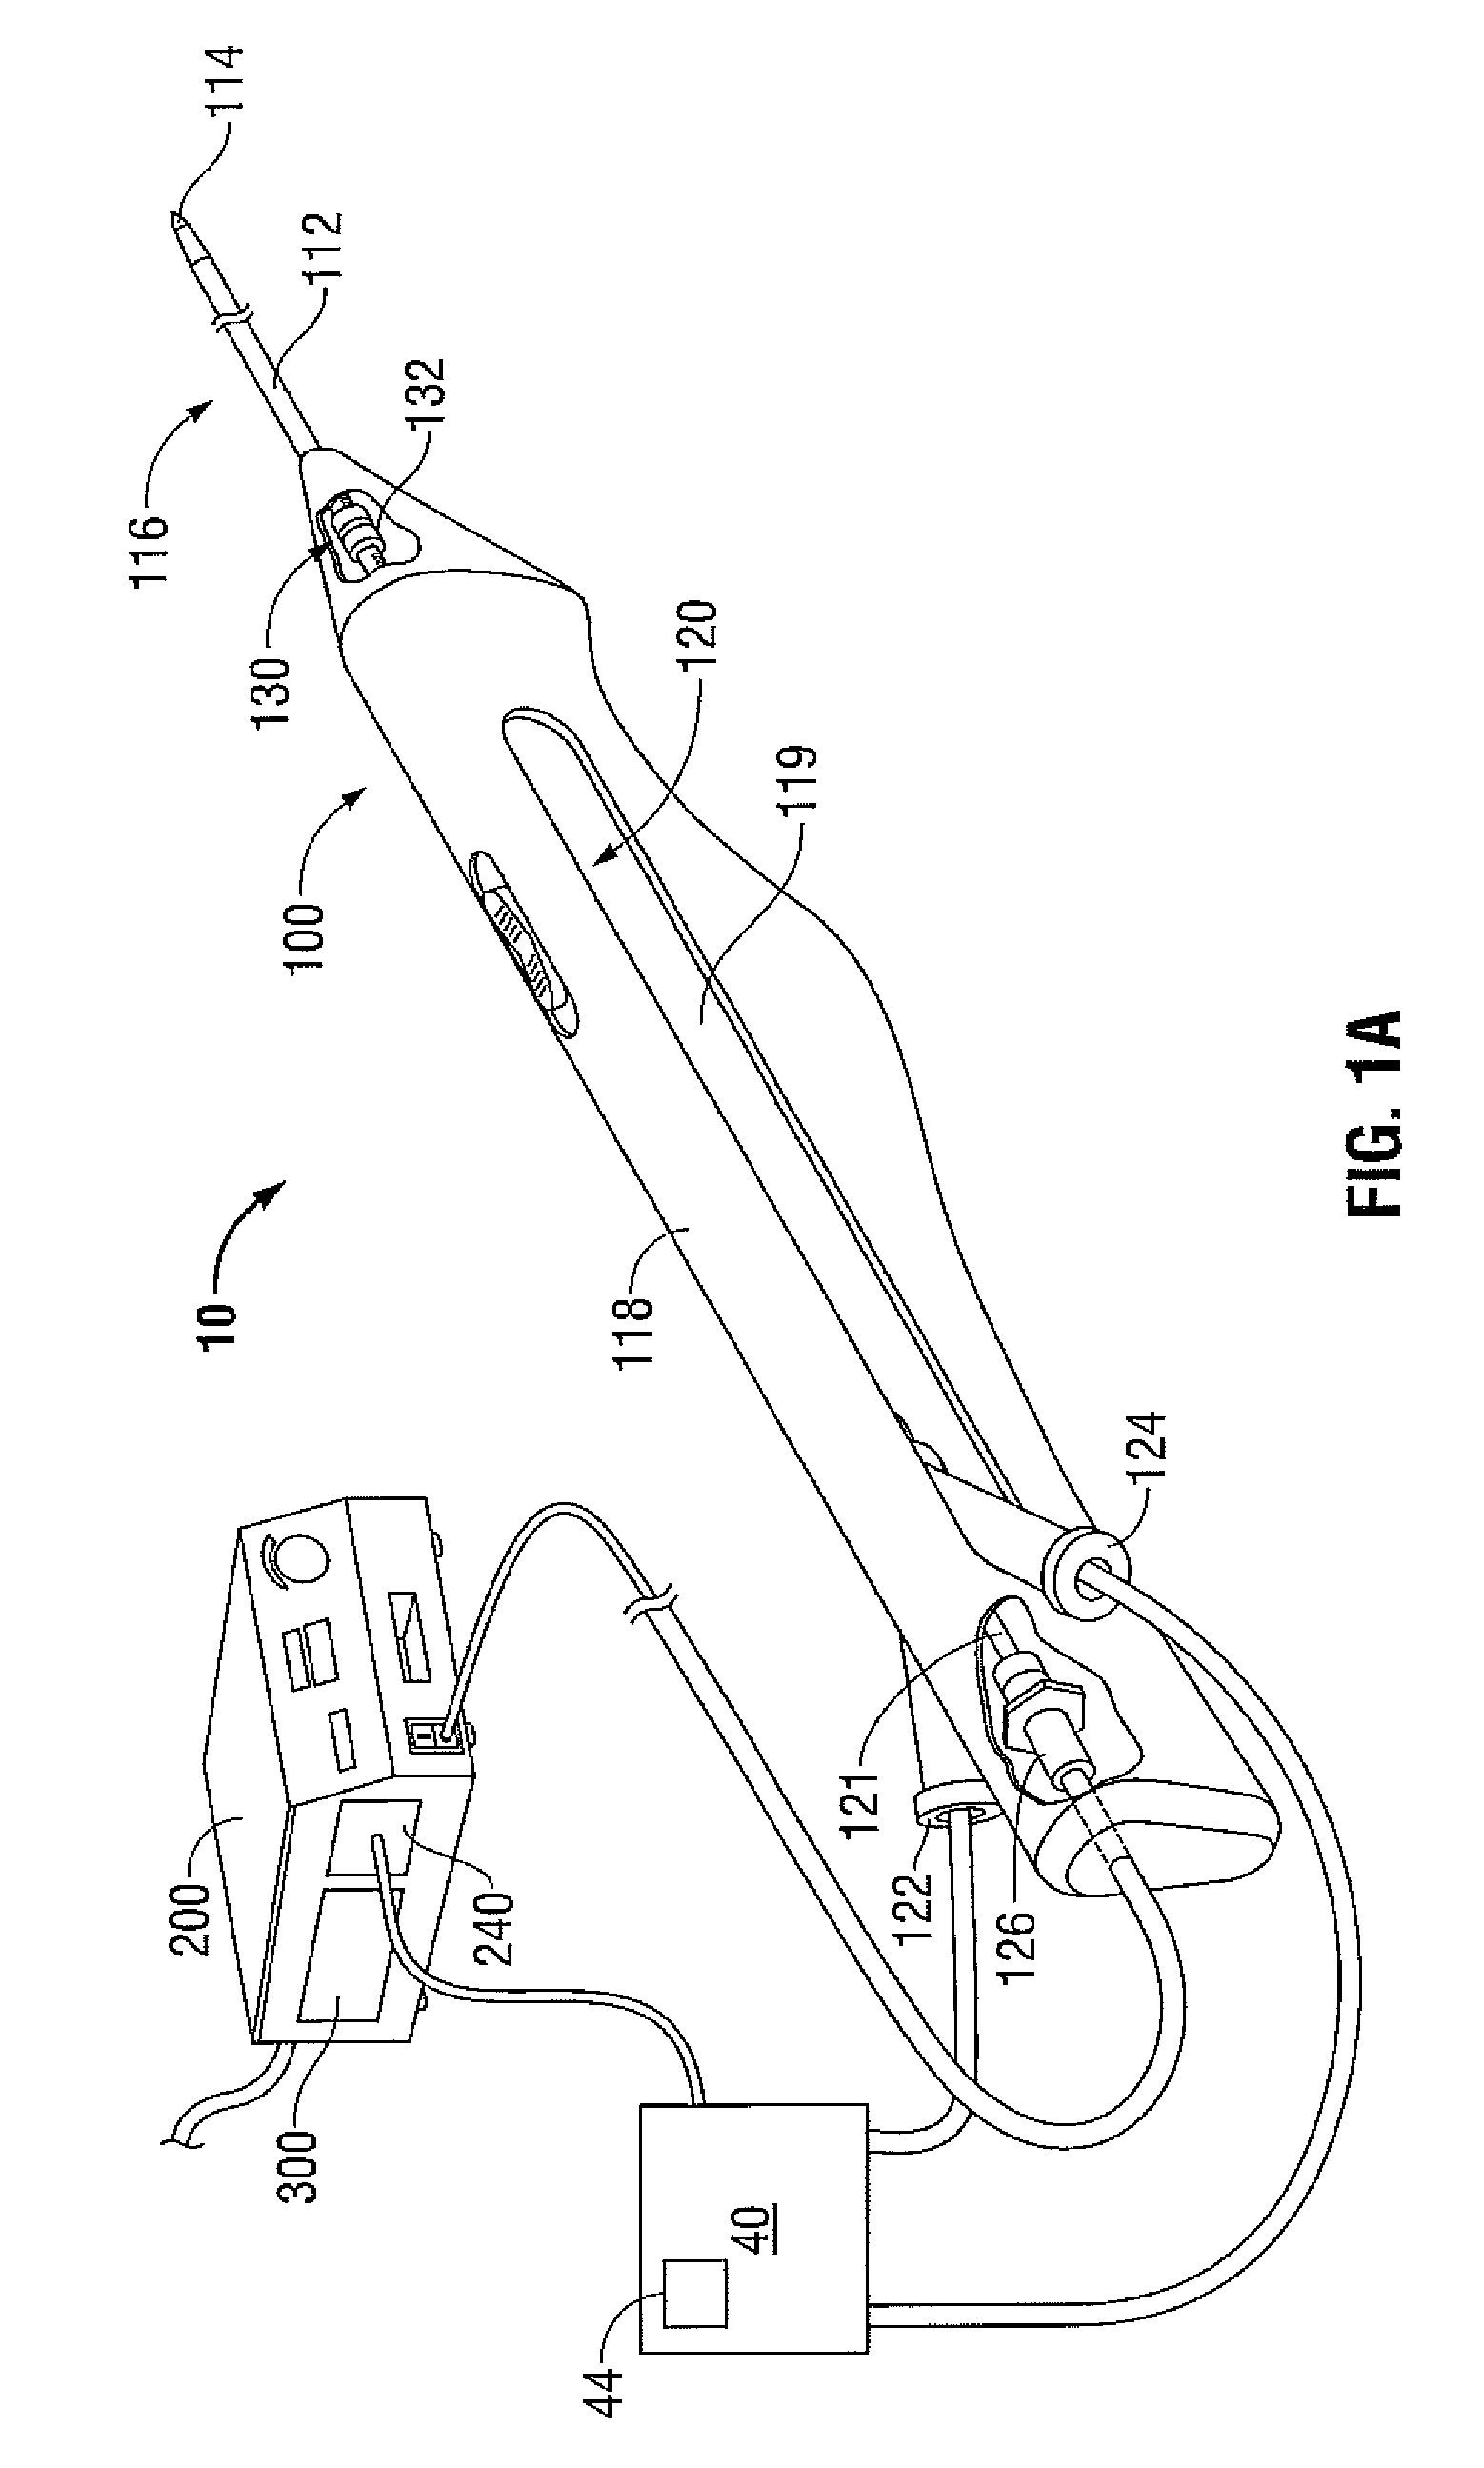 System and method for monitoring ablation size